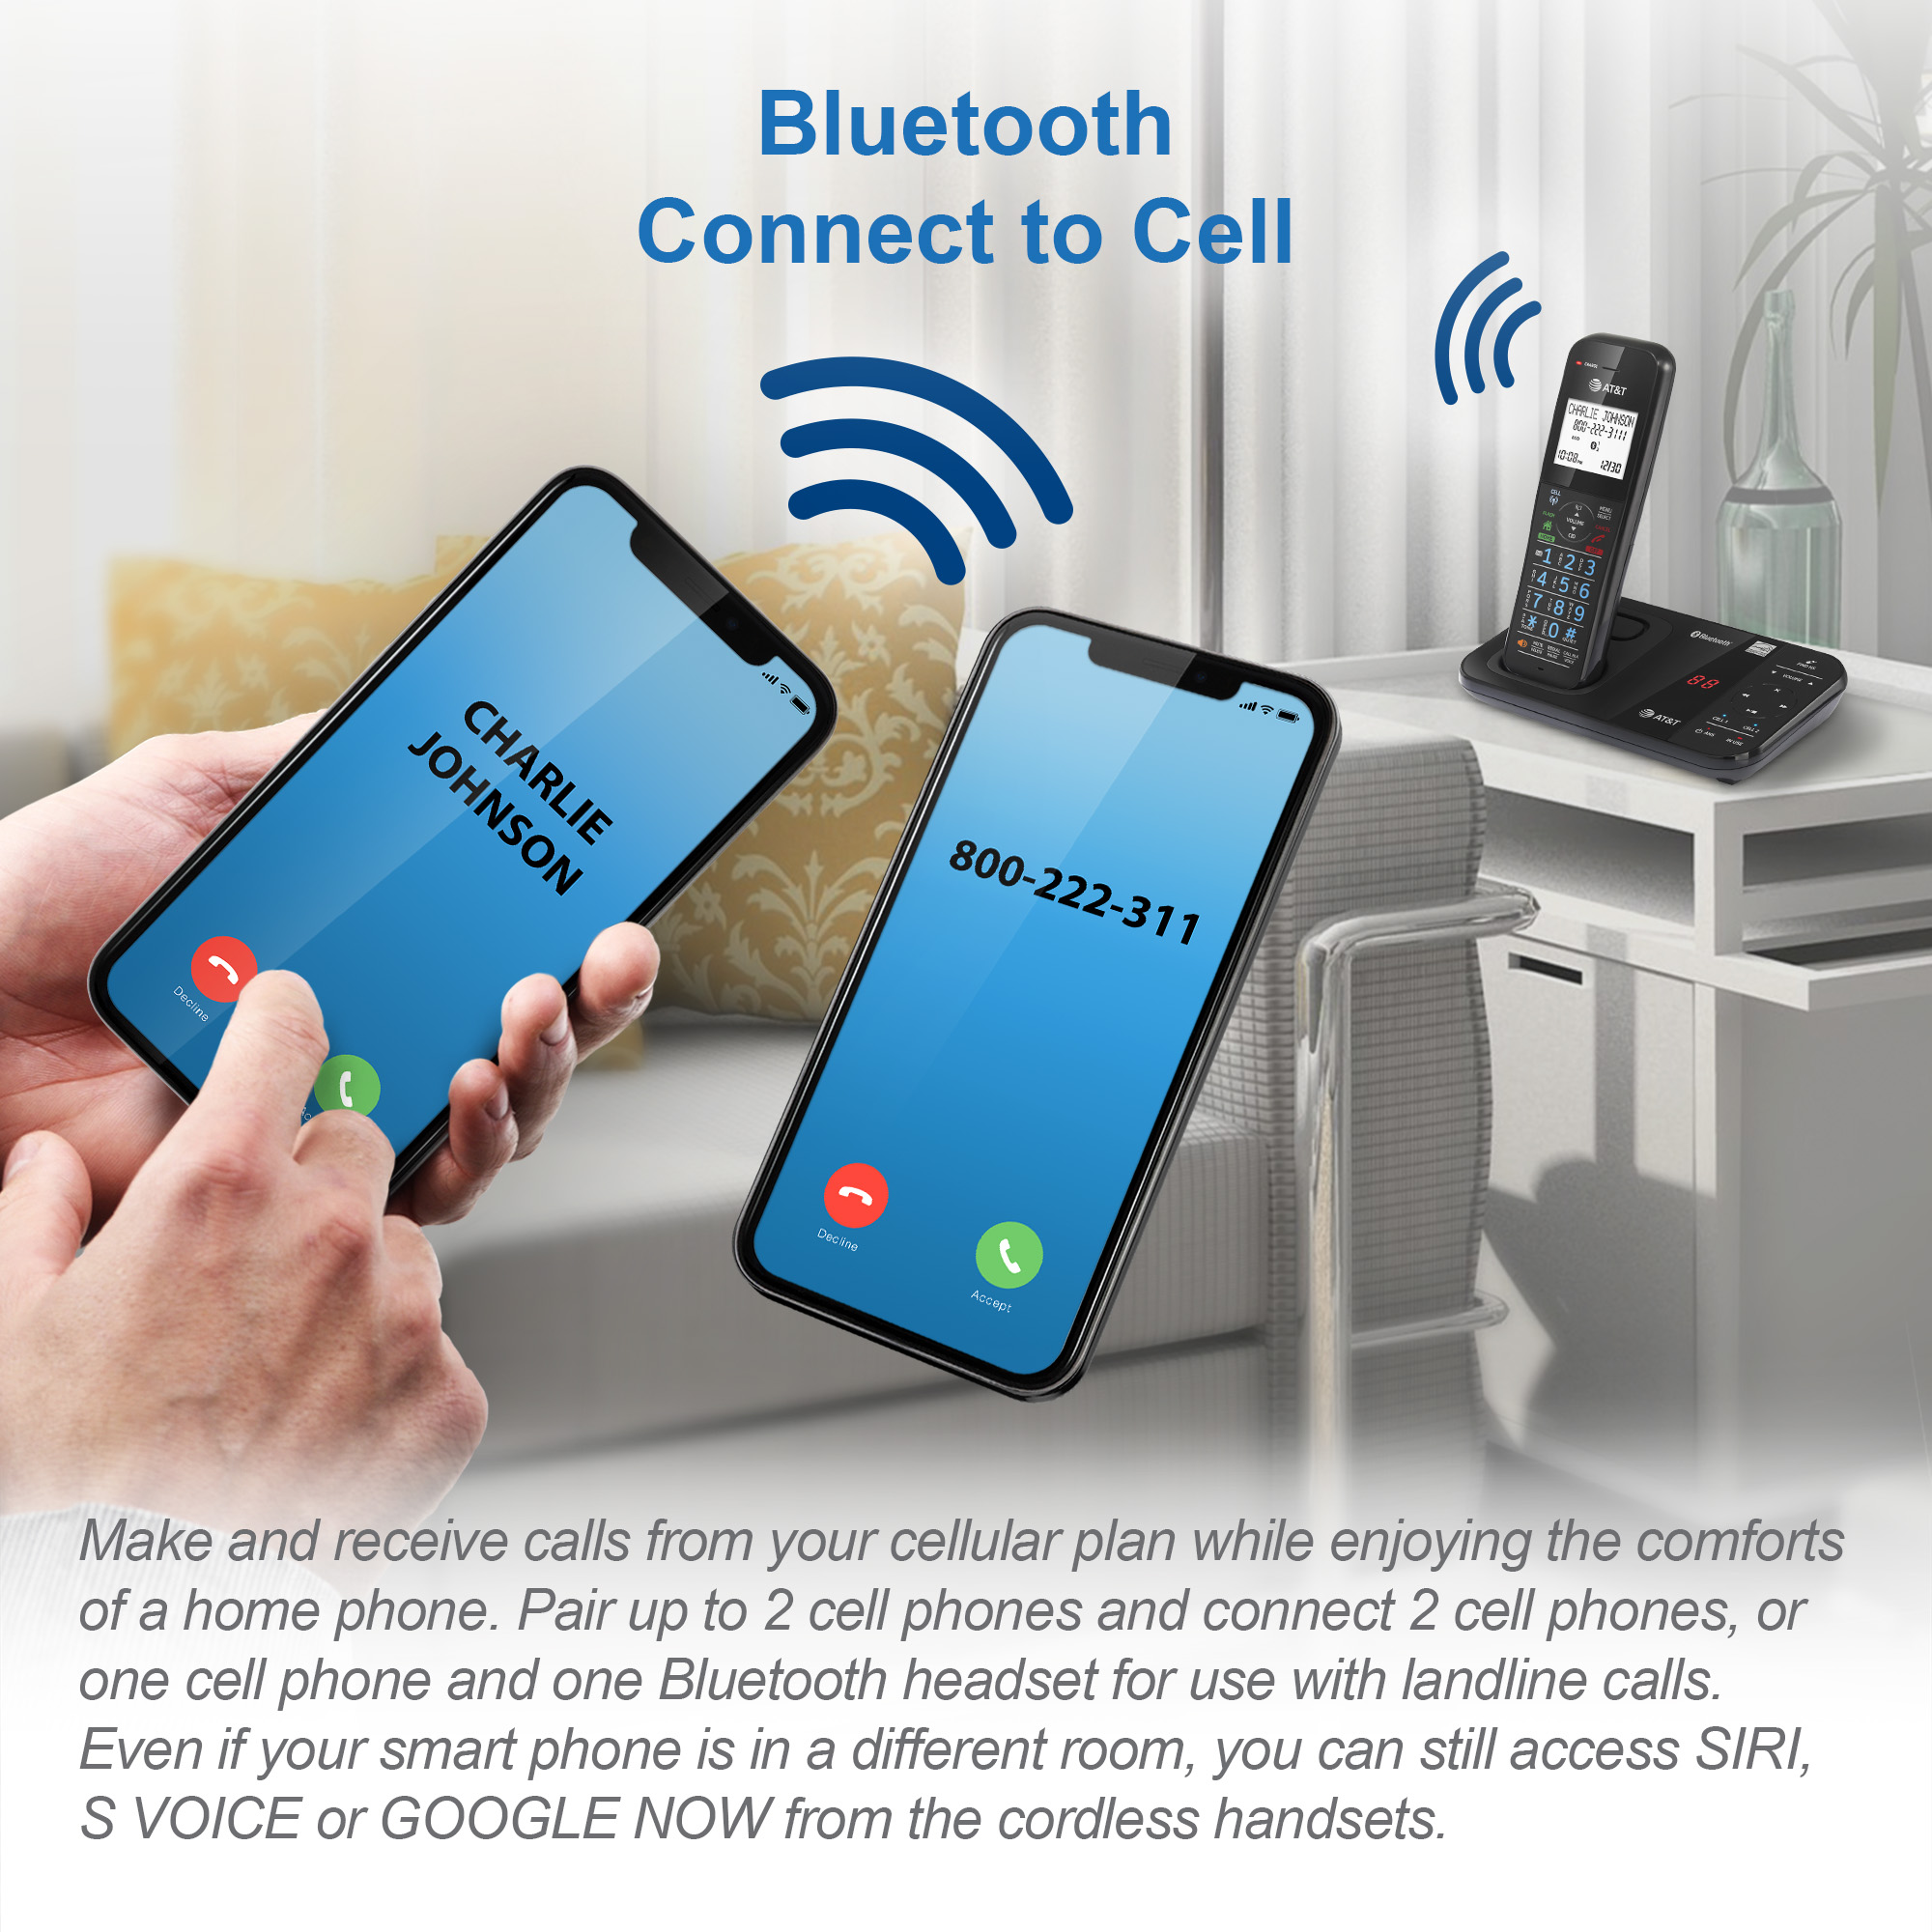 2-Handset Expandable Antibacterial Plastic Cordless Phone with Bluetooth Connect to Cell, Smart Call Blocker and Answering System - view 4